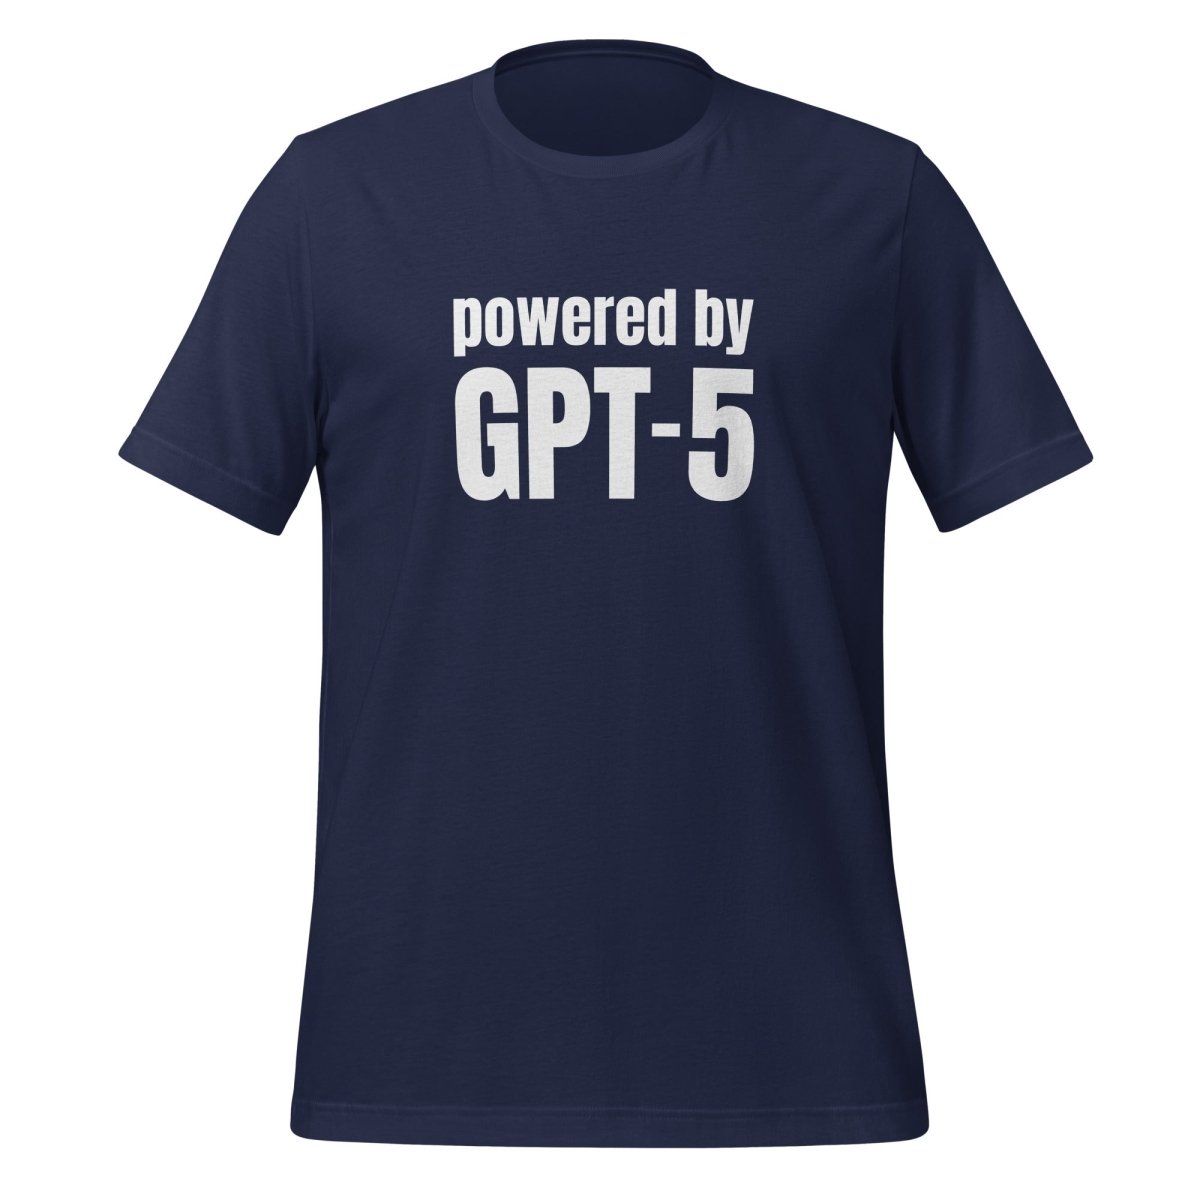 Powered by GPT - 5 T - Shirt (unisex) - Navy - AI Store